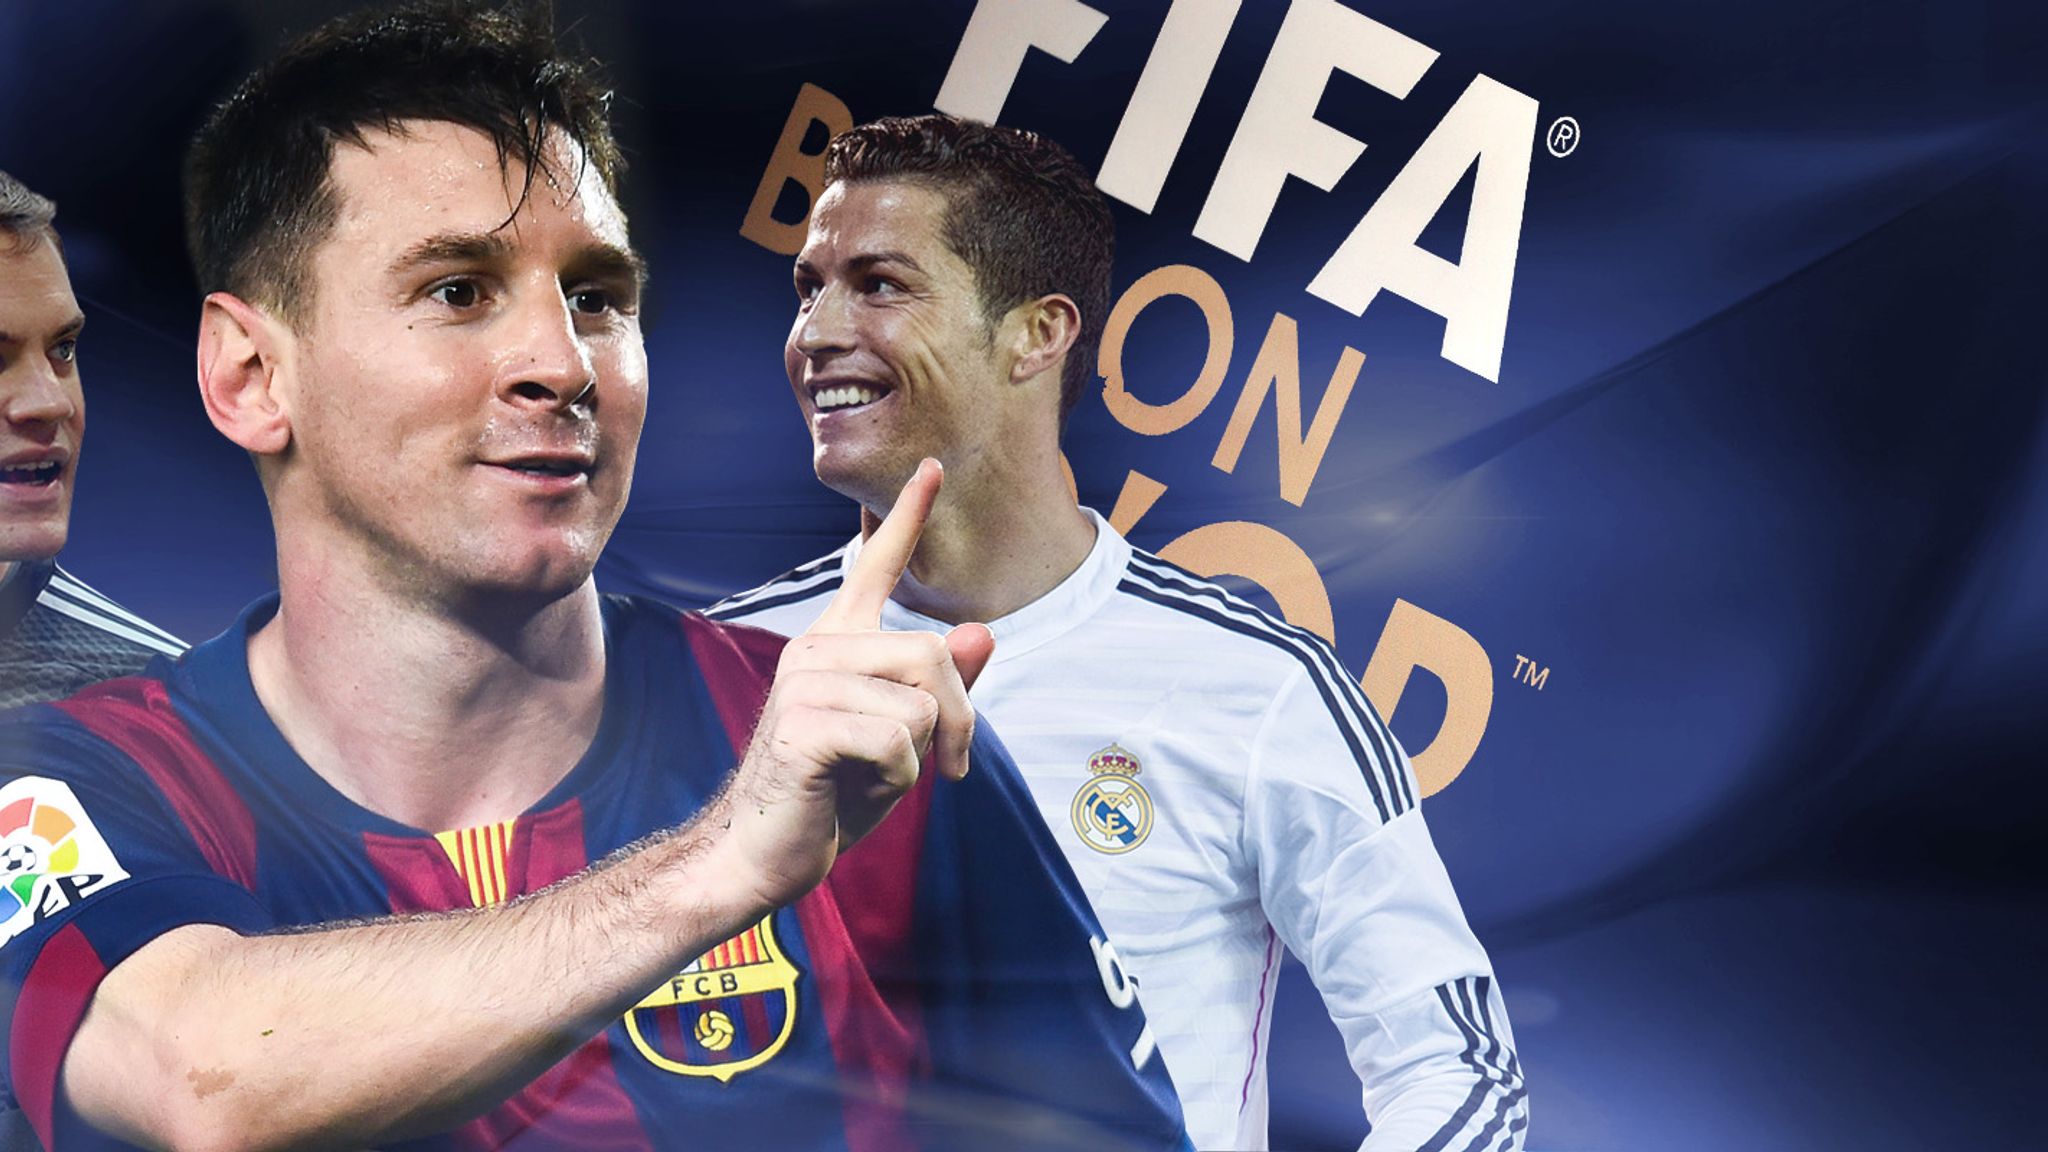 Lionel Messi and Cristiano Ronaldo's feats approaching new